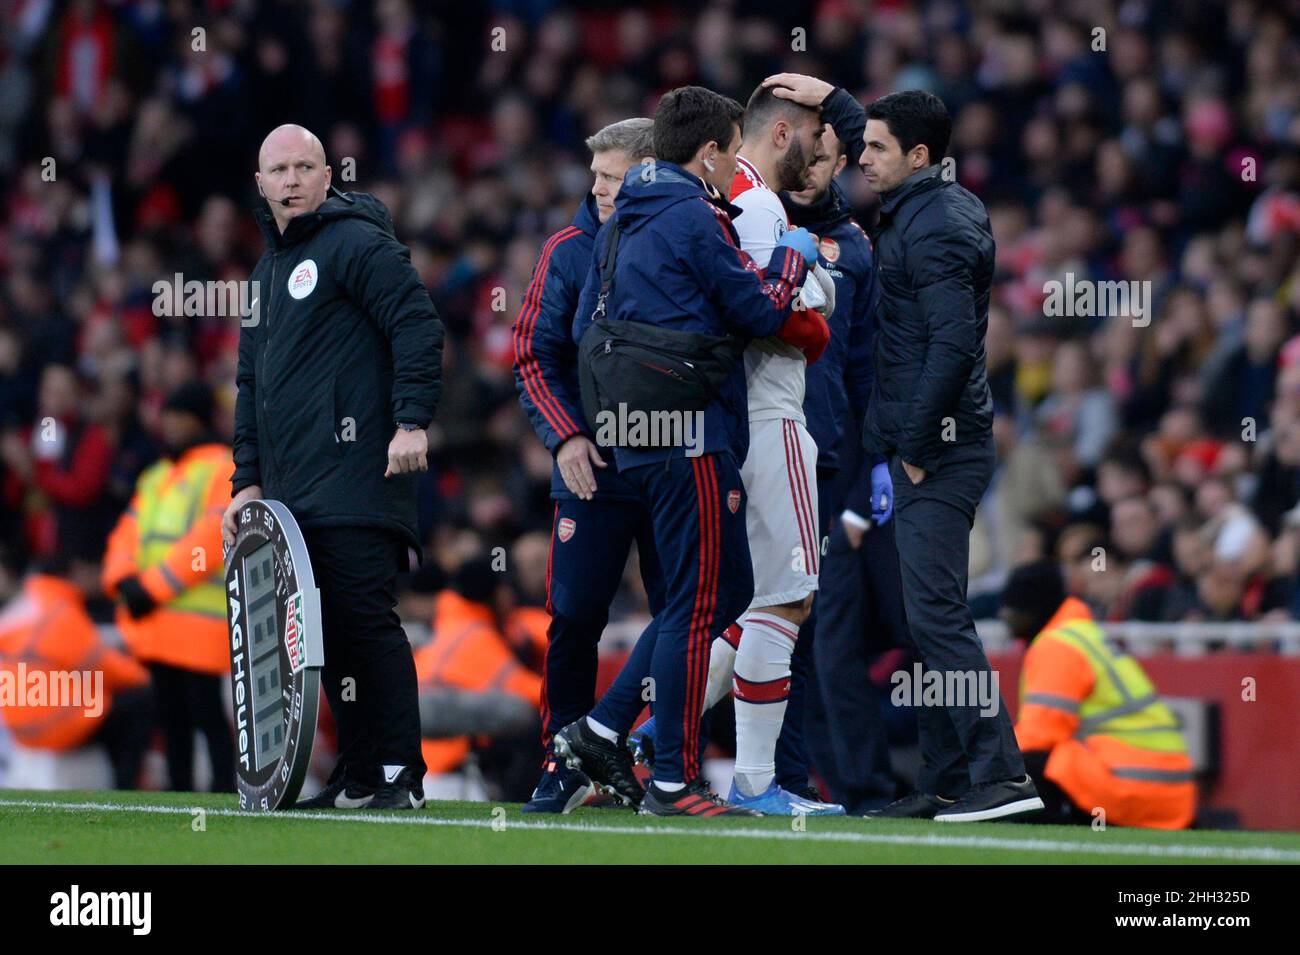 Sead Kolasinac of Arsenal leaves the pitch after suffering an injury during the Premier League match between Arsenal and Everton at the Emirates Stadium in London, UK - 16th February 2020 Stock Photo